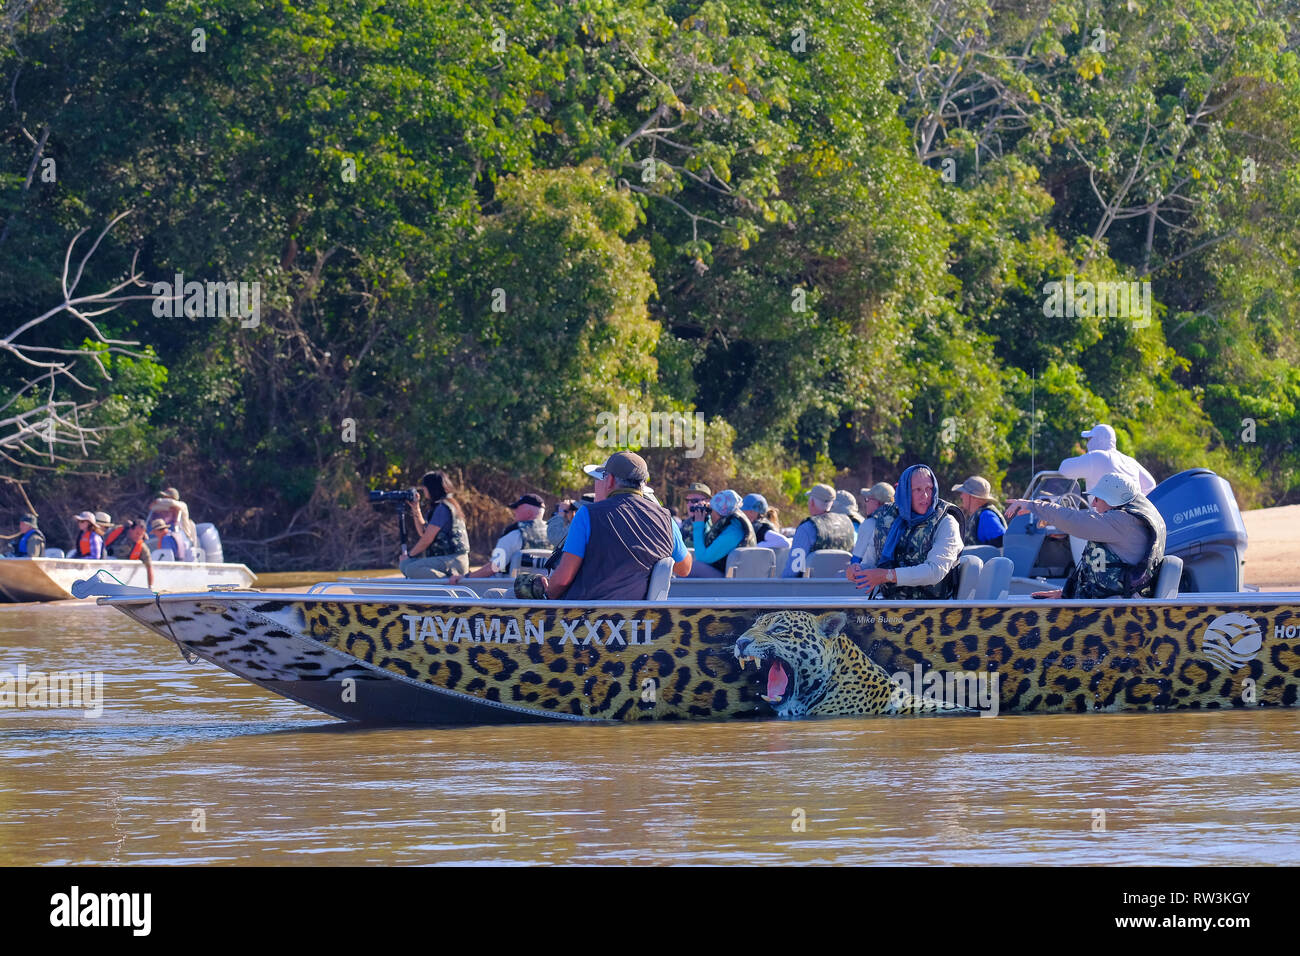 PORTO JOFRE, MATO GROSSO, BRAZIL, JULY 27, 2018: Tourists and guide on boat  tour for Jaguar wildlife watching, Pantanal Stock Photo - Alamy